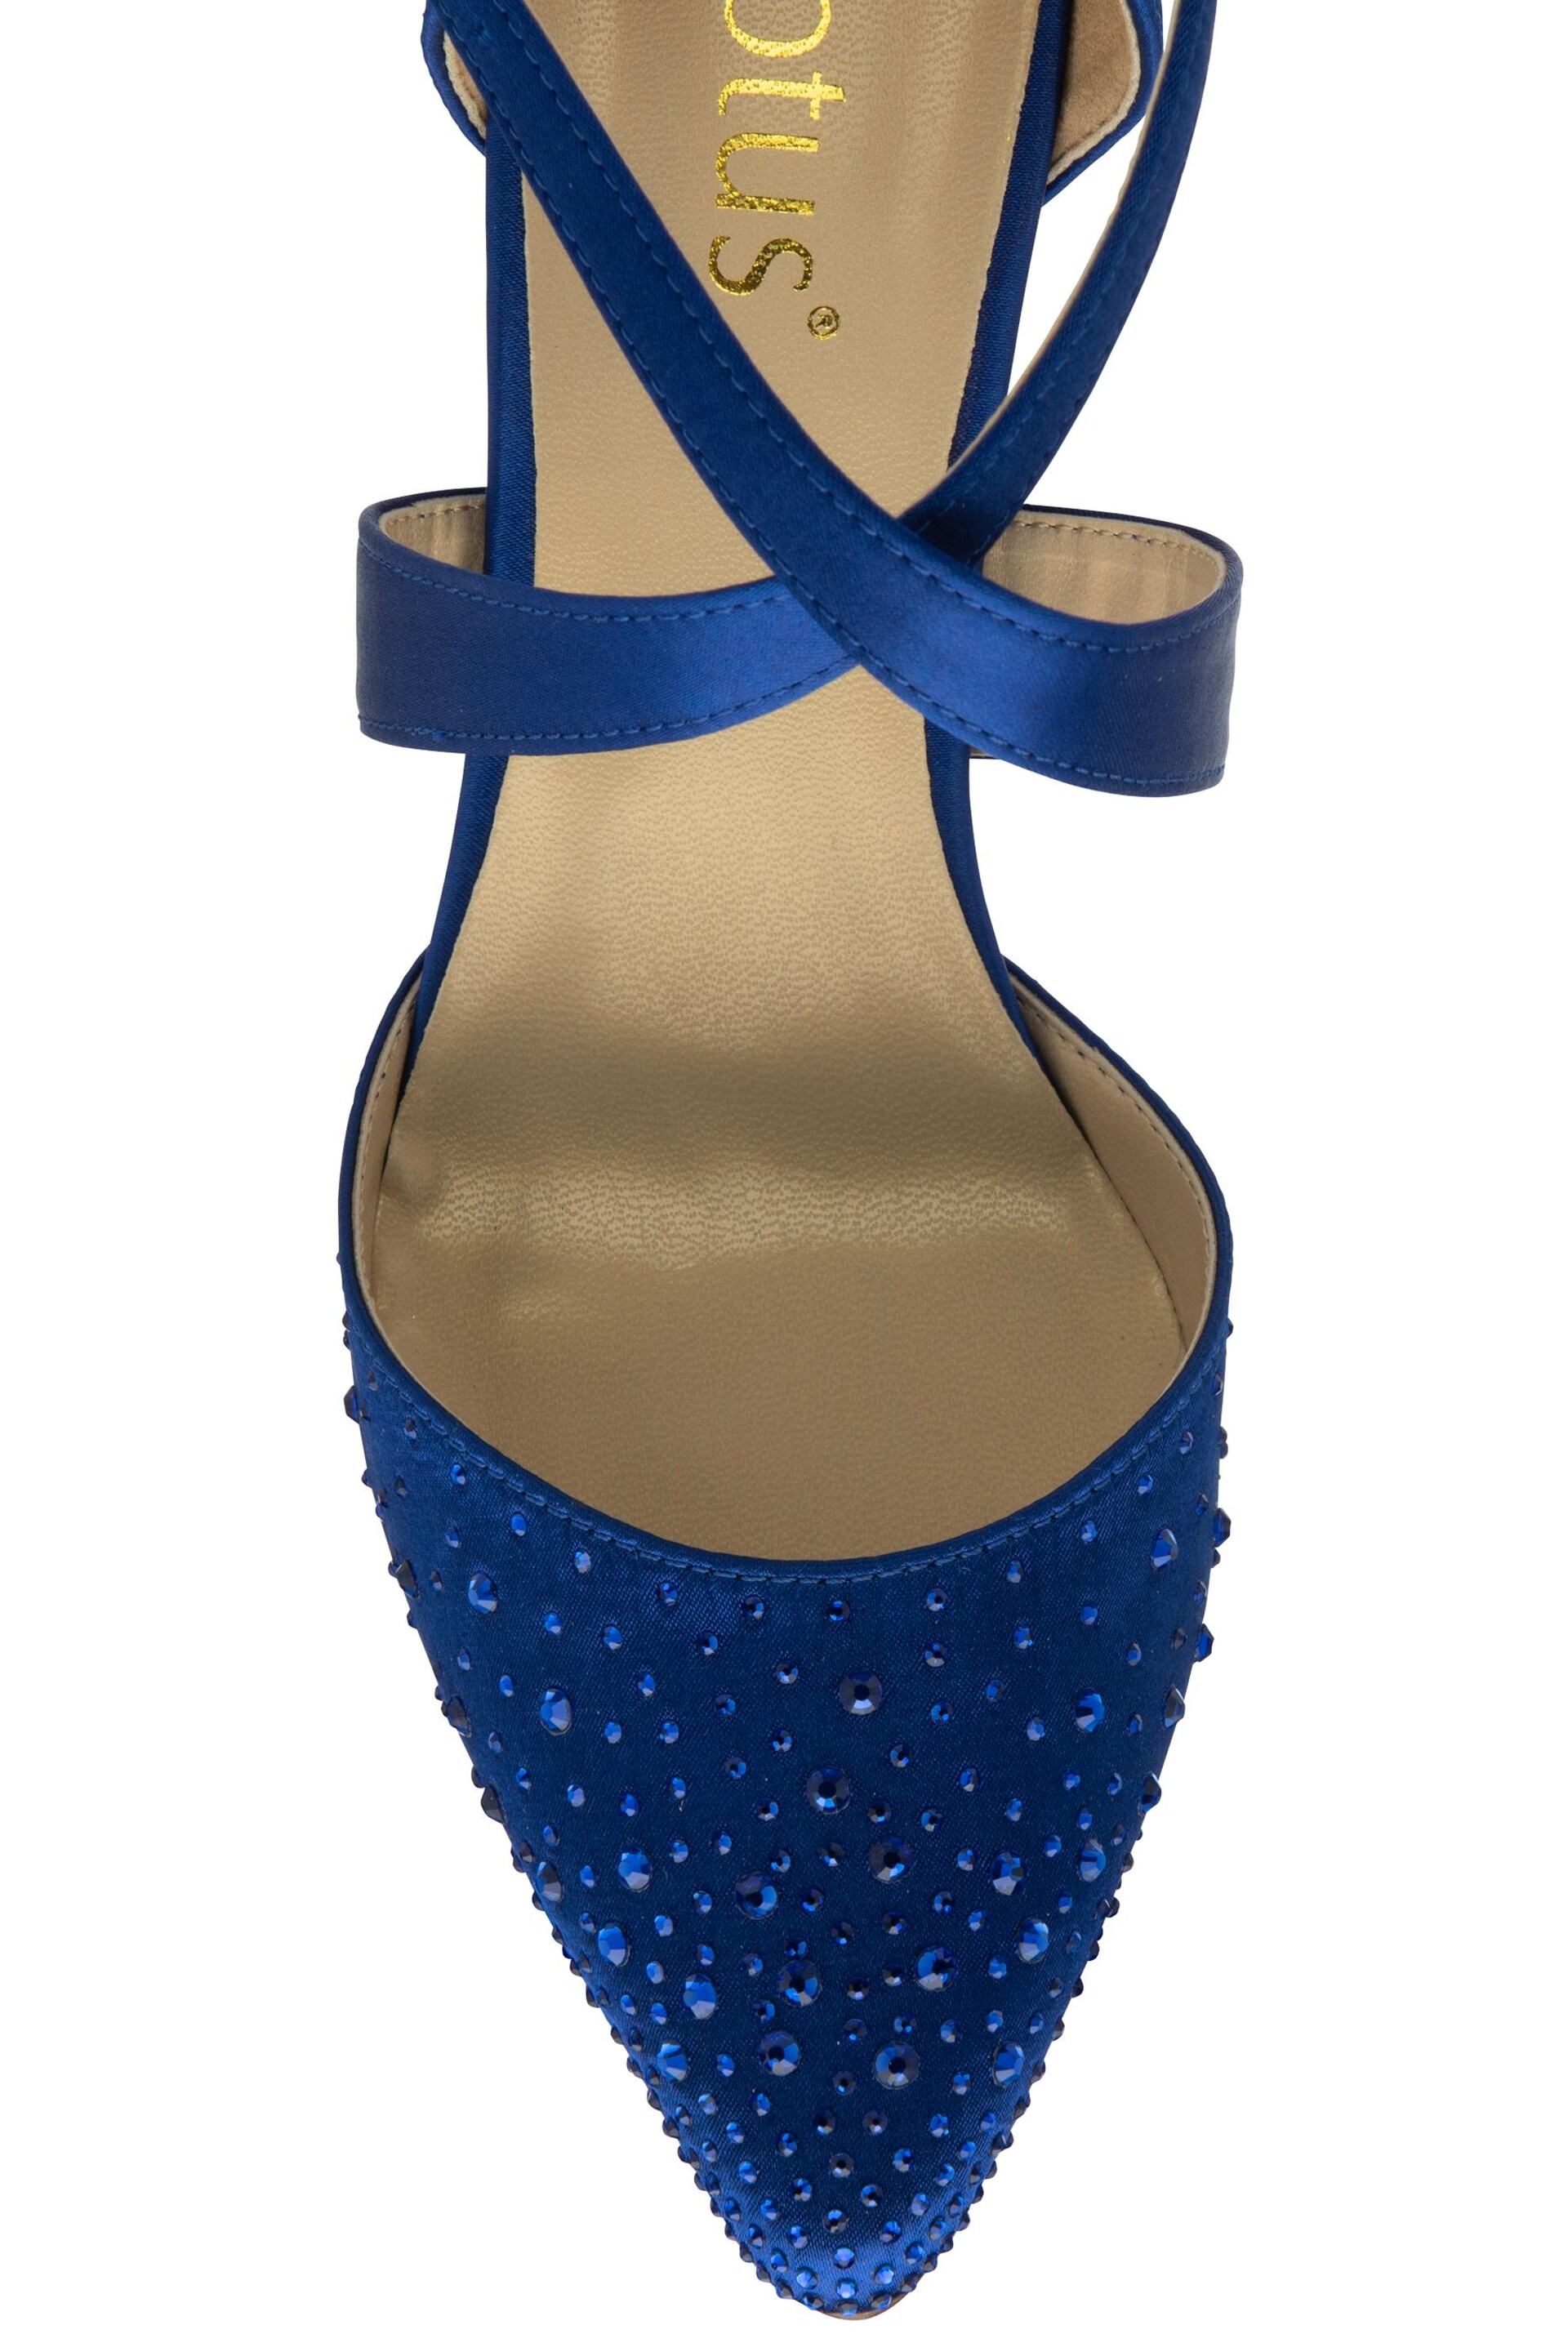 Lotus Blue Diamante Pointed-Toe Court Shoes - Image 4 of 4